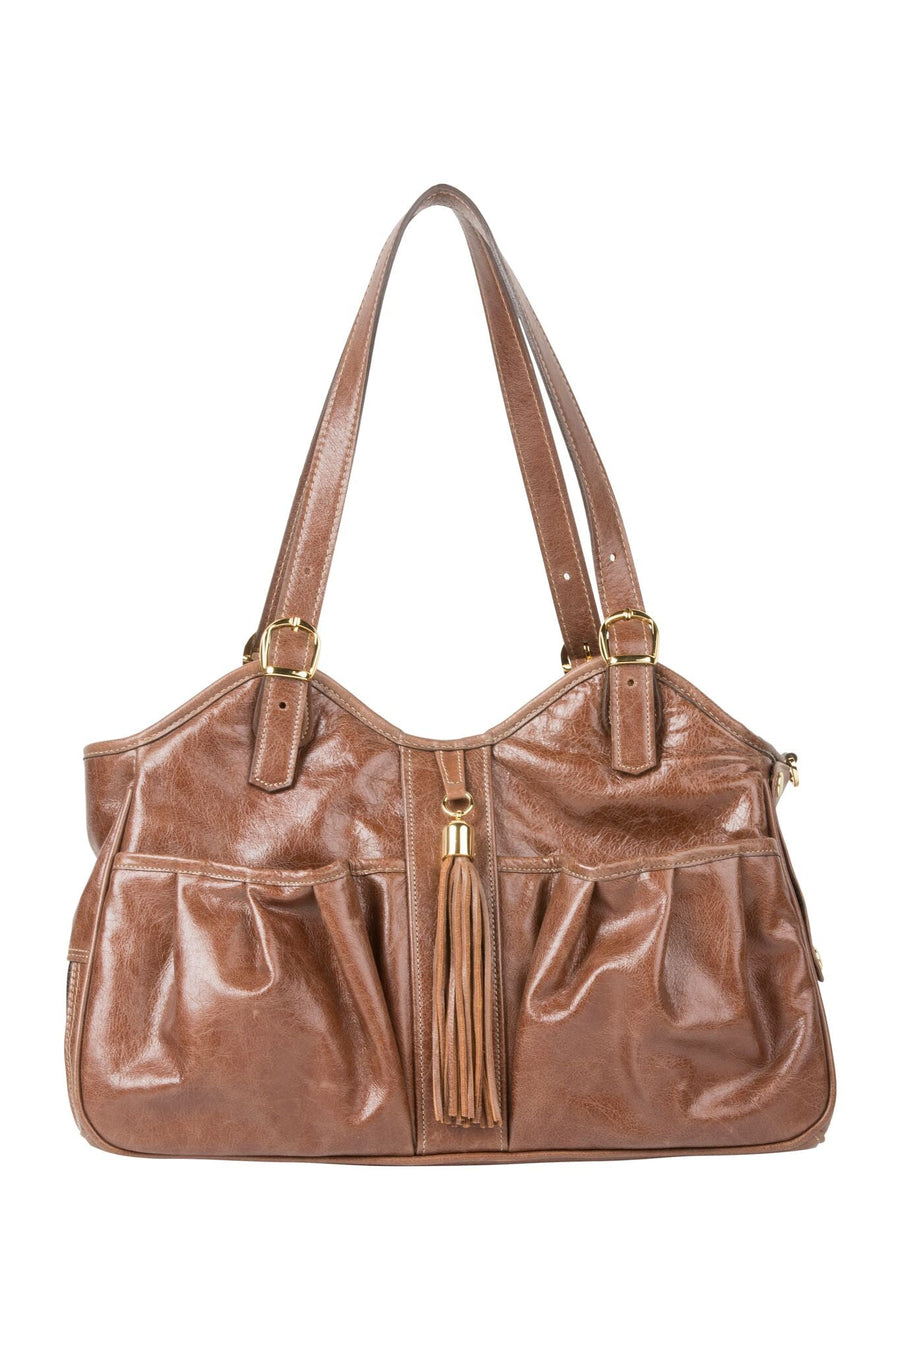 Metro Toffee with tassel